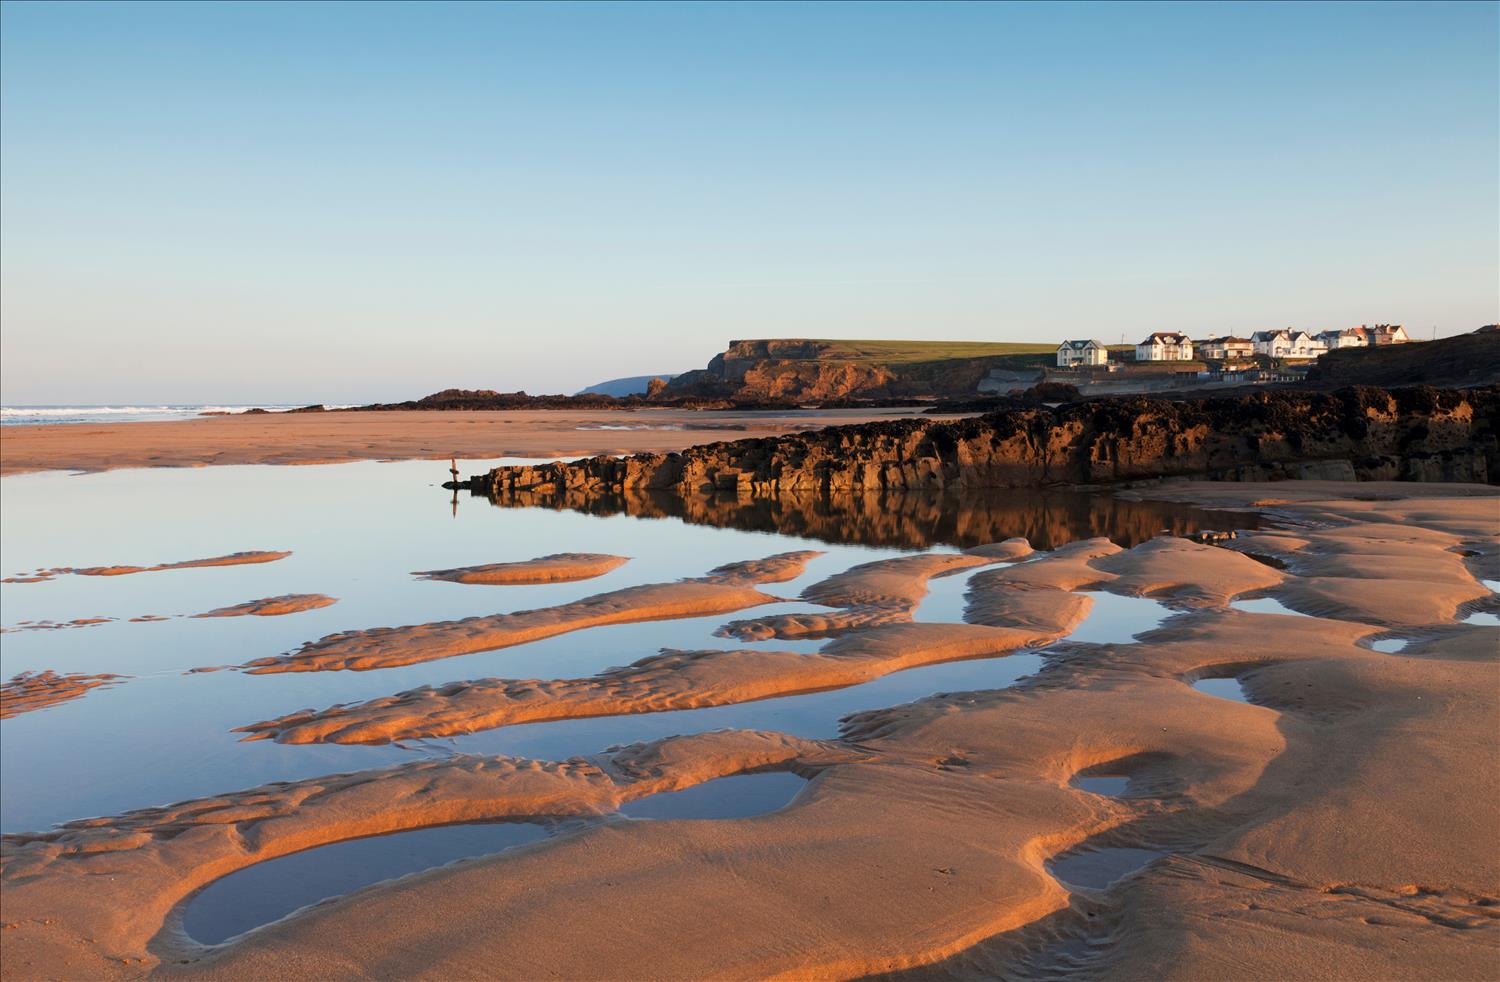 The sand and pools of water at family-favourite Summerleaze Beach near Bude, North Cornwall, lit up by the setting sun on a beautiful clear day